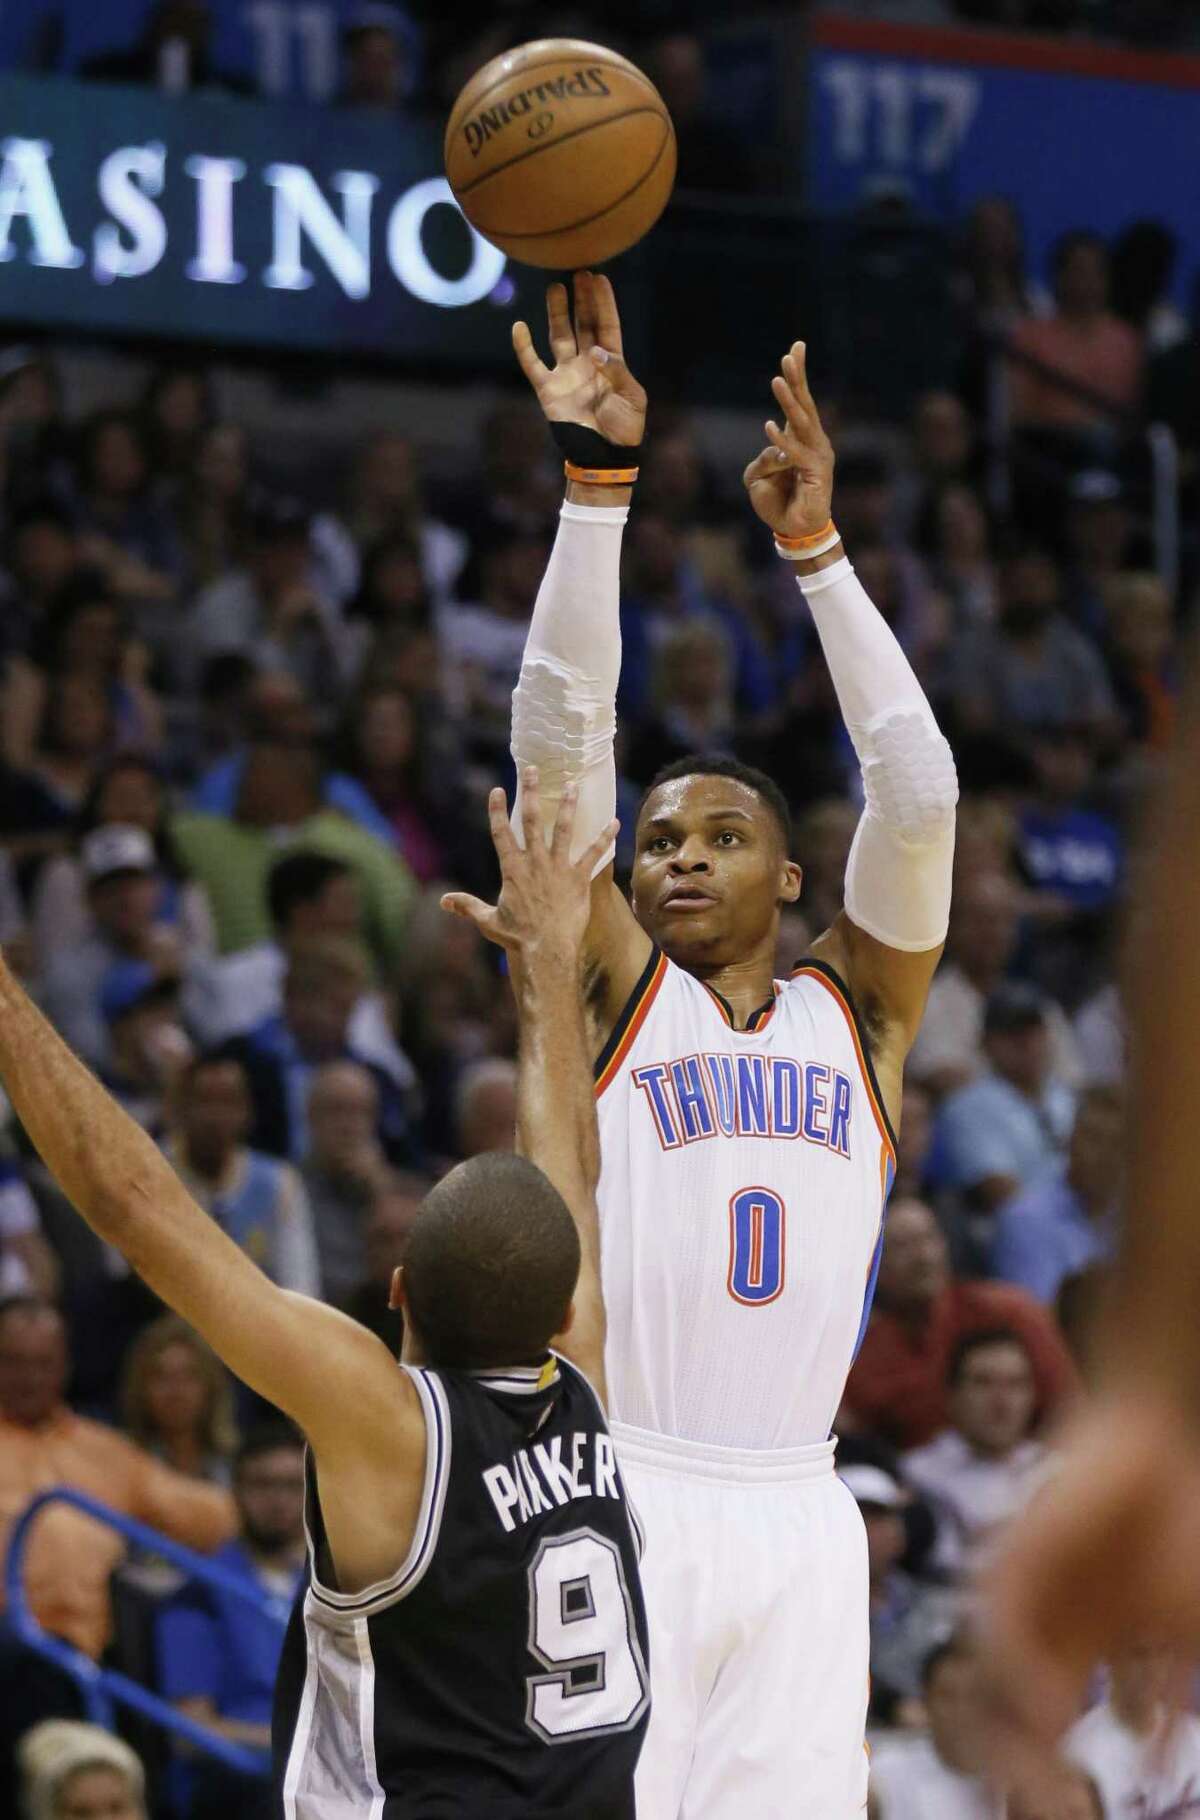 Oklahoma City Thunder guard Russell Westbrook (0) shoots over San Antonio Spurs guard Tony Parker (9) in the second quarter of an NBA basketball game in Oklahoma City, Friday, March 31, 2017. (AP Photo/Sue Ogrocki)